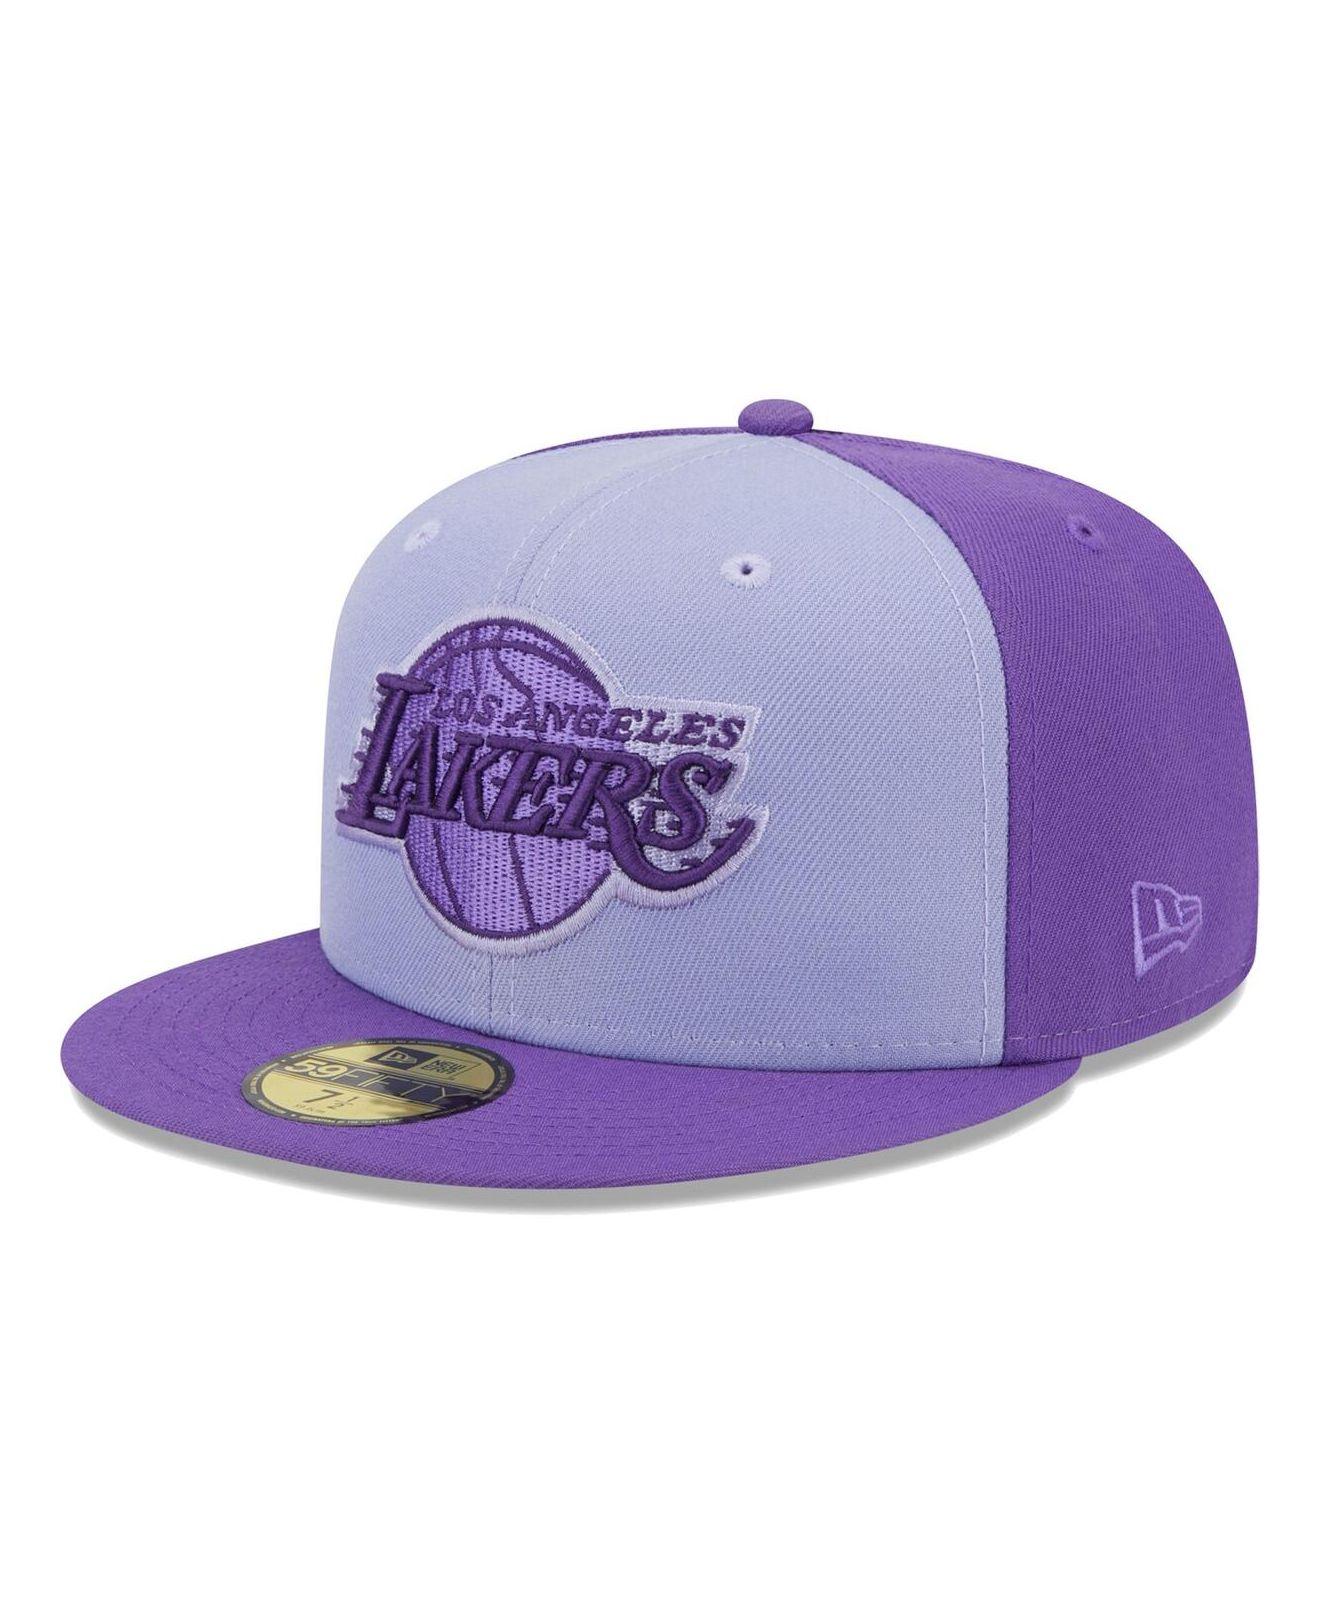 Men's New Era Purple Florida Marlins Vice 59FIFTY Fitted Hat